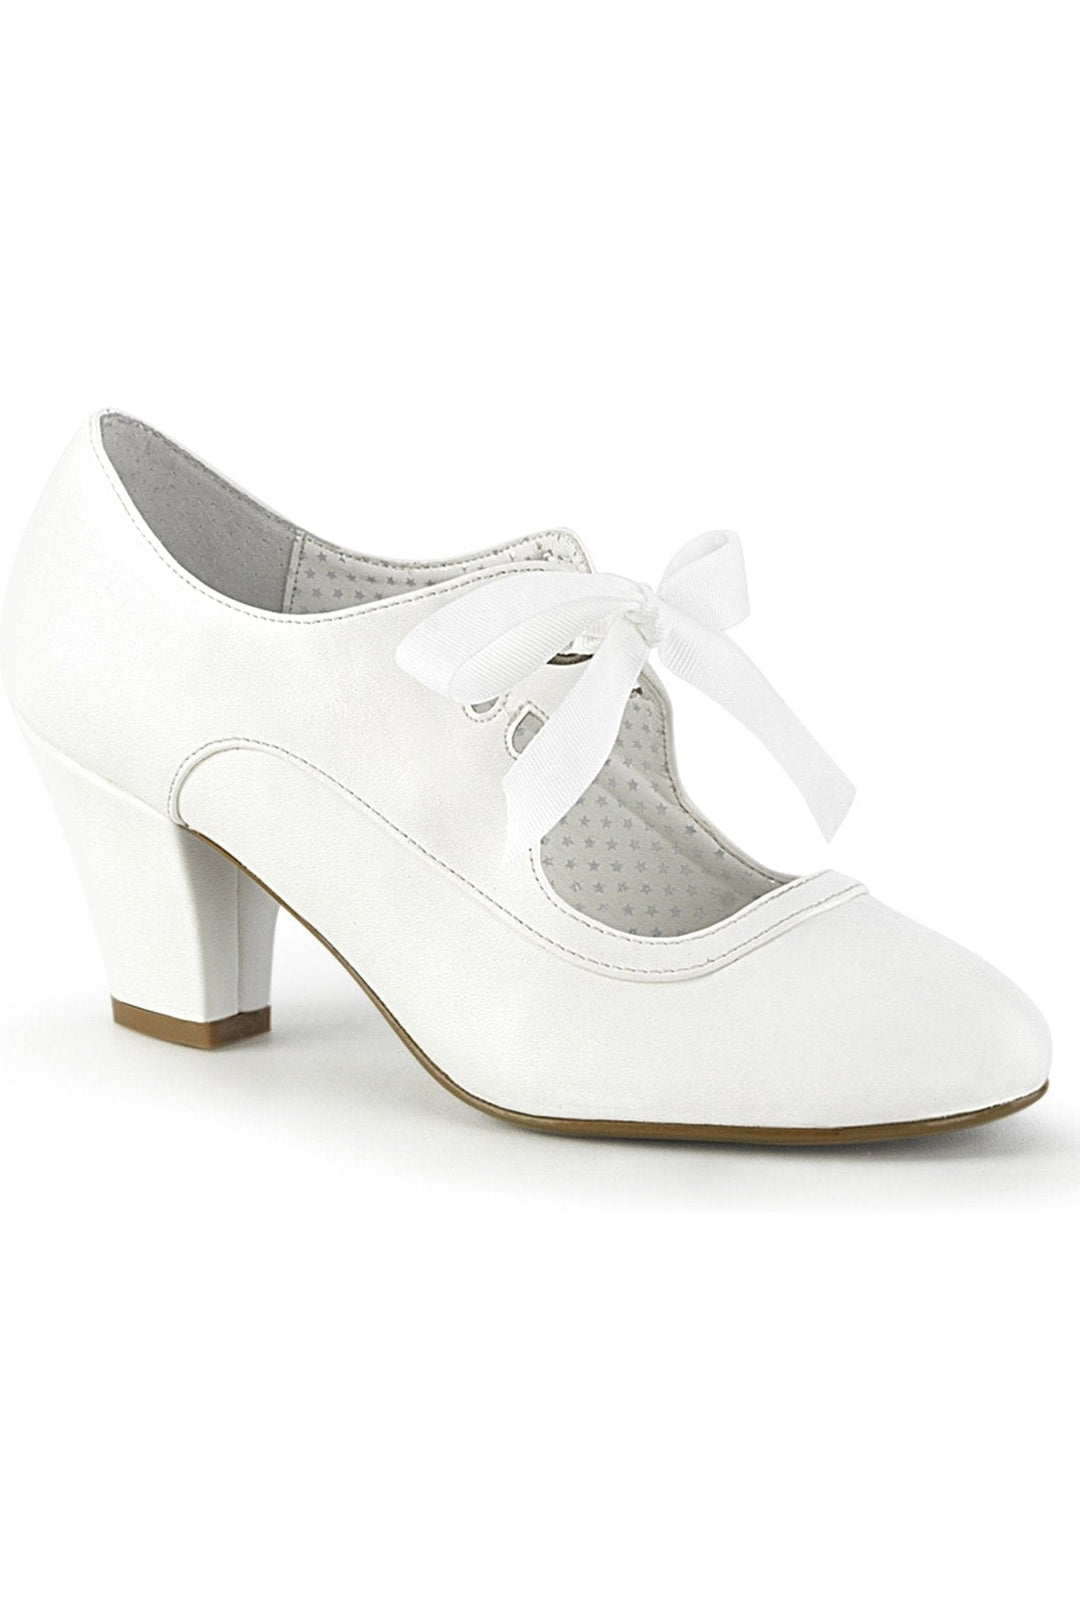 WIGGLE-32 Pump | White Patent-Pumps-Pin Up Couture-White-7-Patent-SEXYSHOES.COM